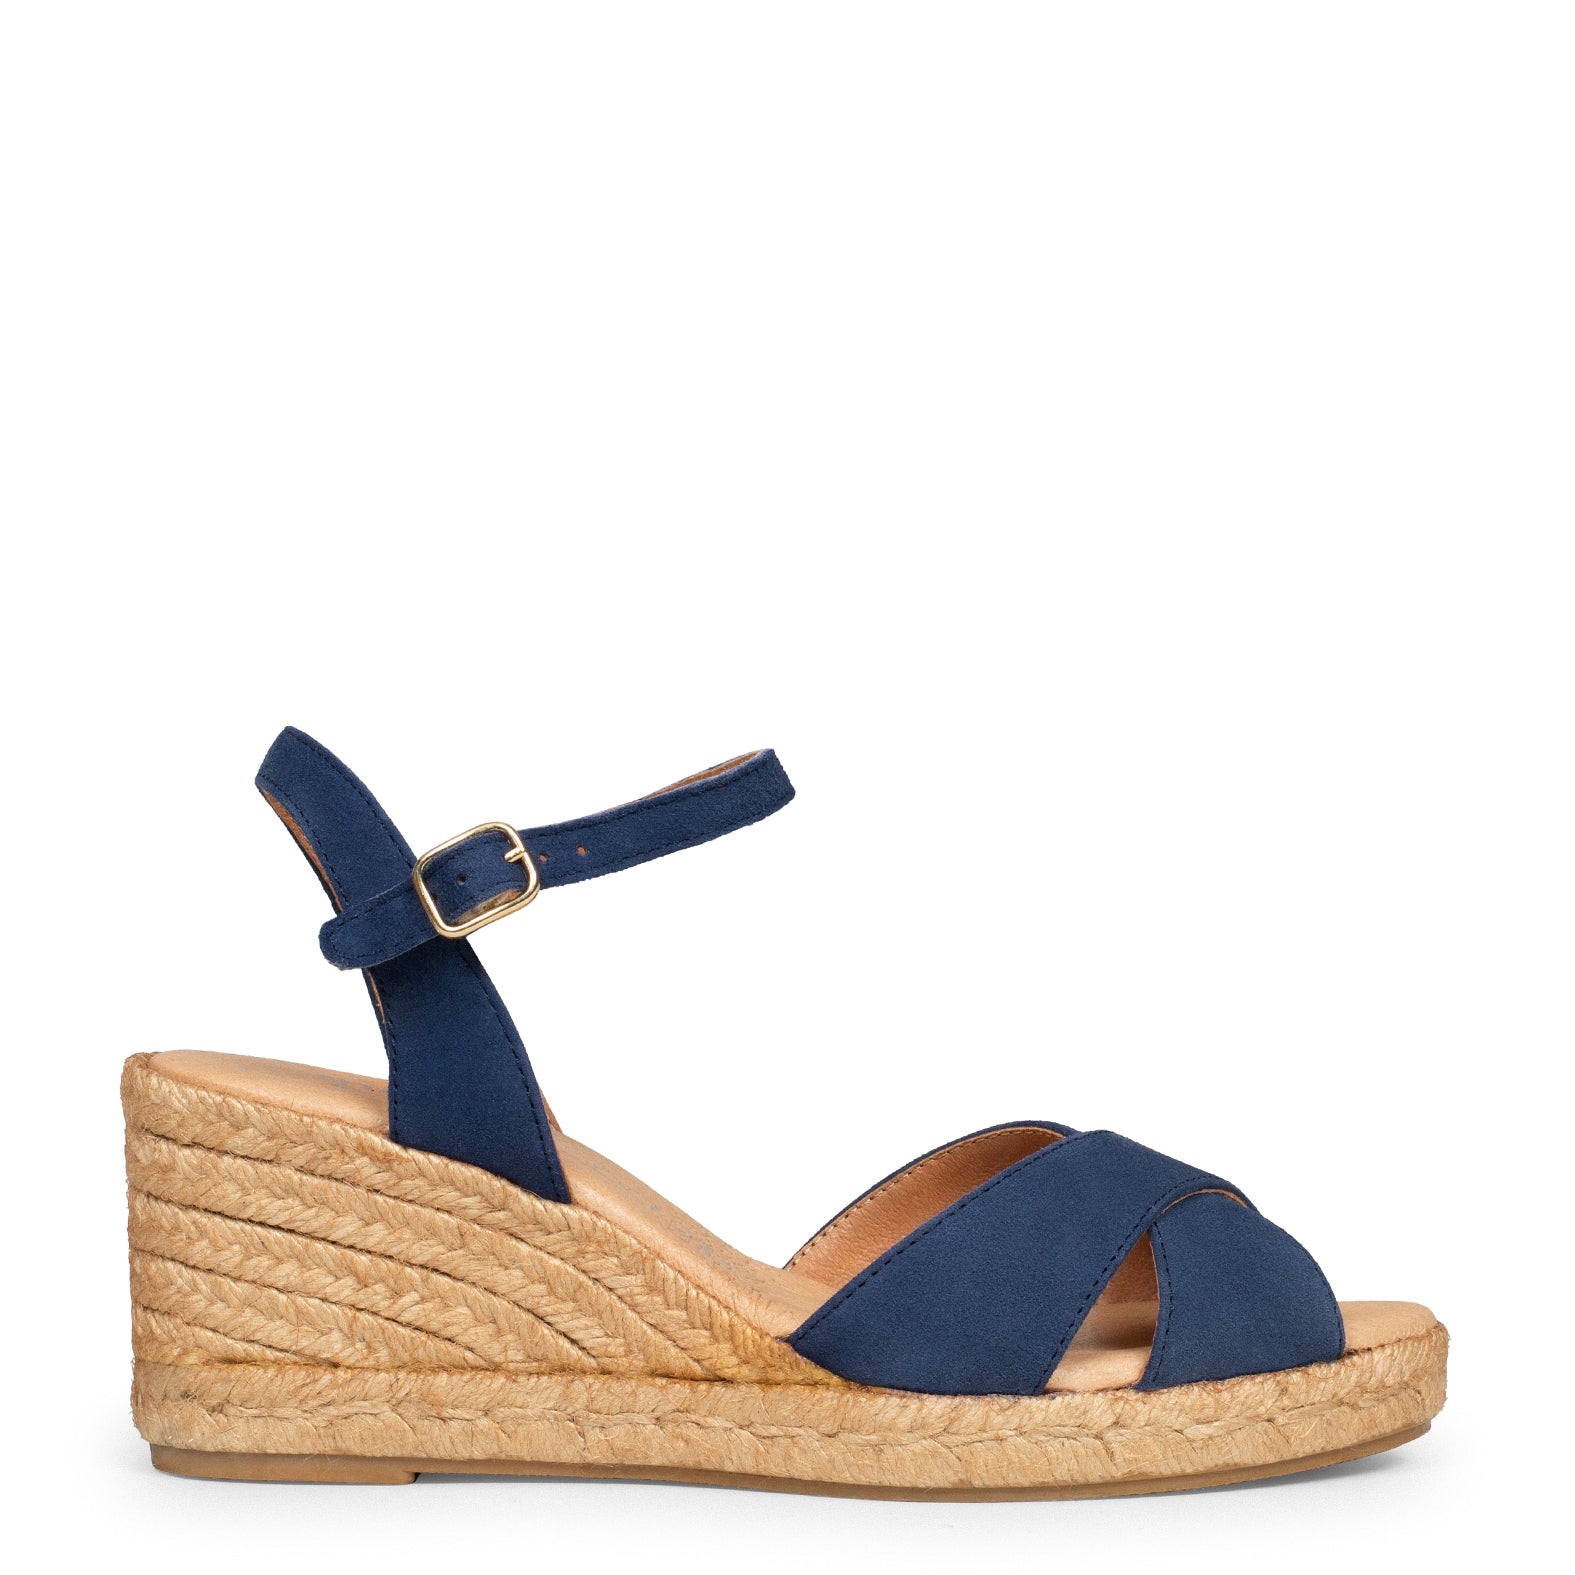 CALPE – NAVY suede leather espadrille